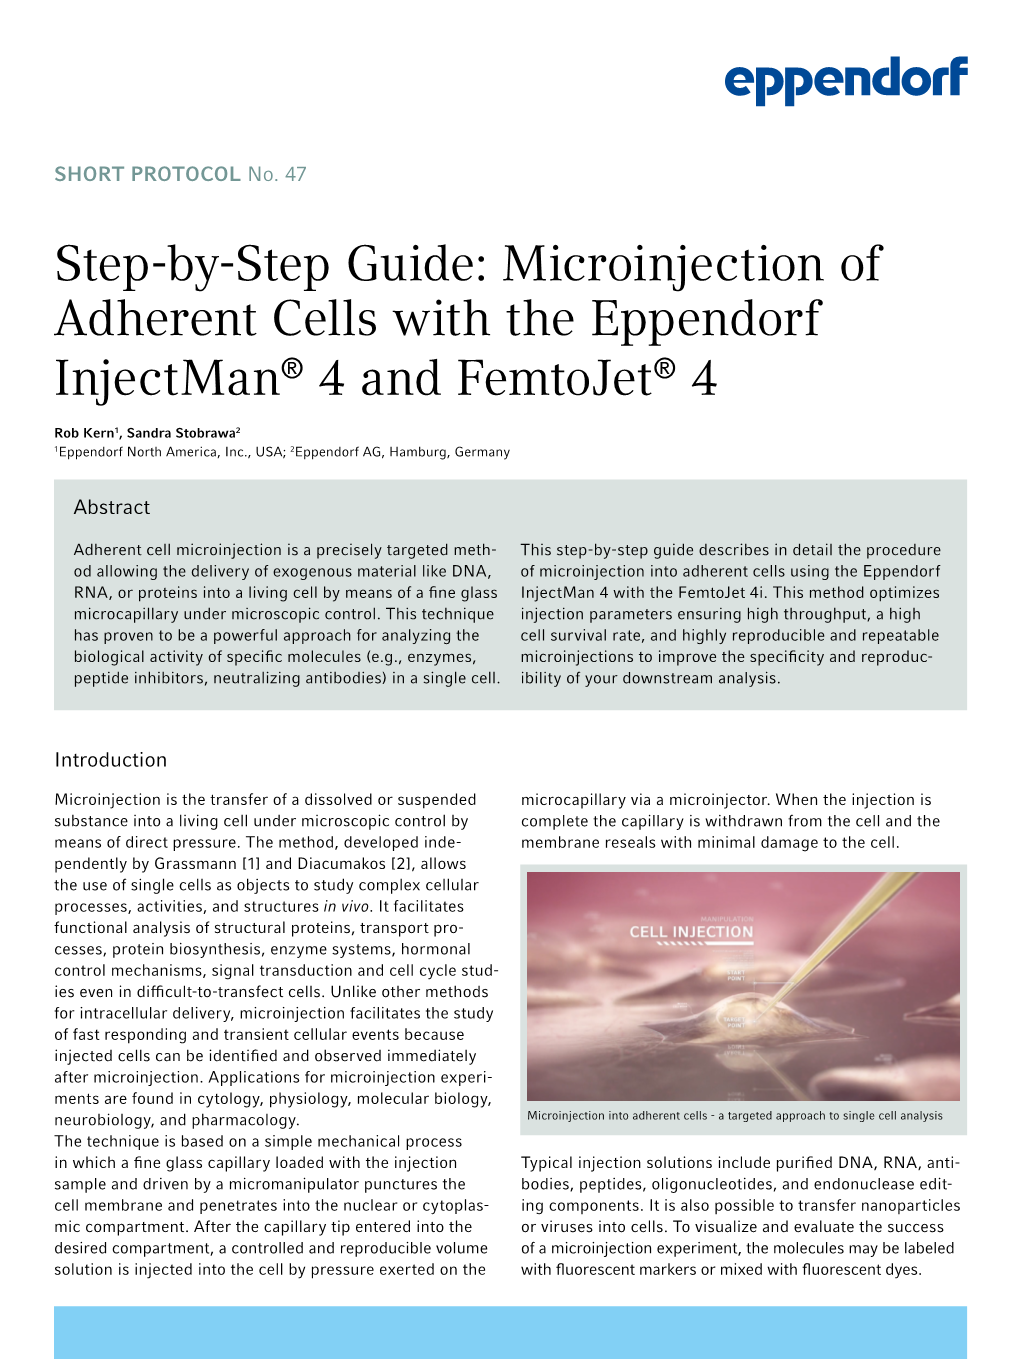 Step-By-Step Guide: Microinjection of Adherent Cells with the Eppendorf Injectman® 4 and Femtojet® 4